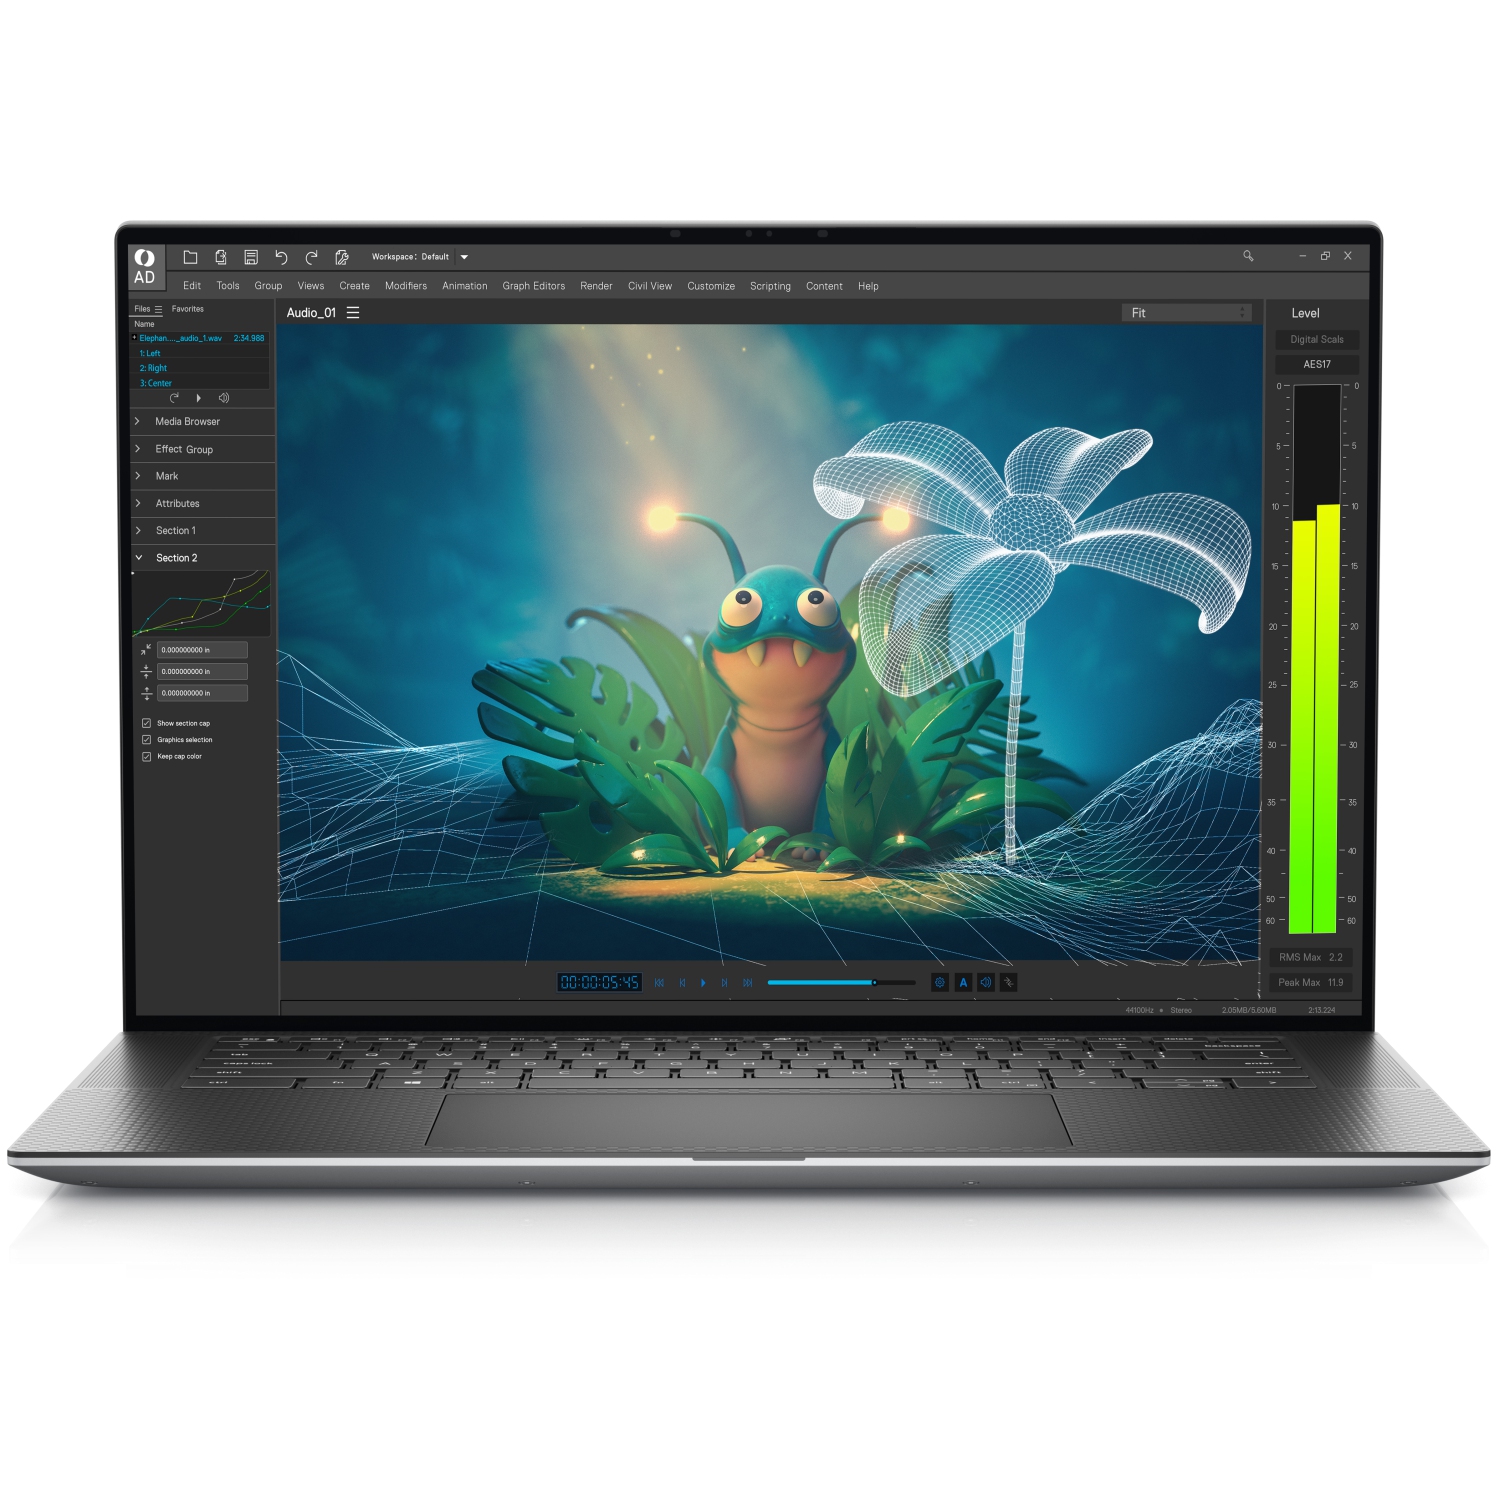 Refurbished (Excellent) – Dell Precision 5000 5570 Workstation Laptop (2022) | 15.6" 4K Touch | Core i7 - 256GB SSD - 32GB RAM - RTX A2000 | 14 Cores @ 4.8 GHz - 12th Gen CPU